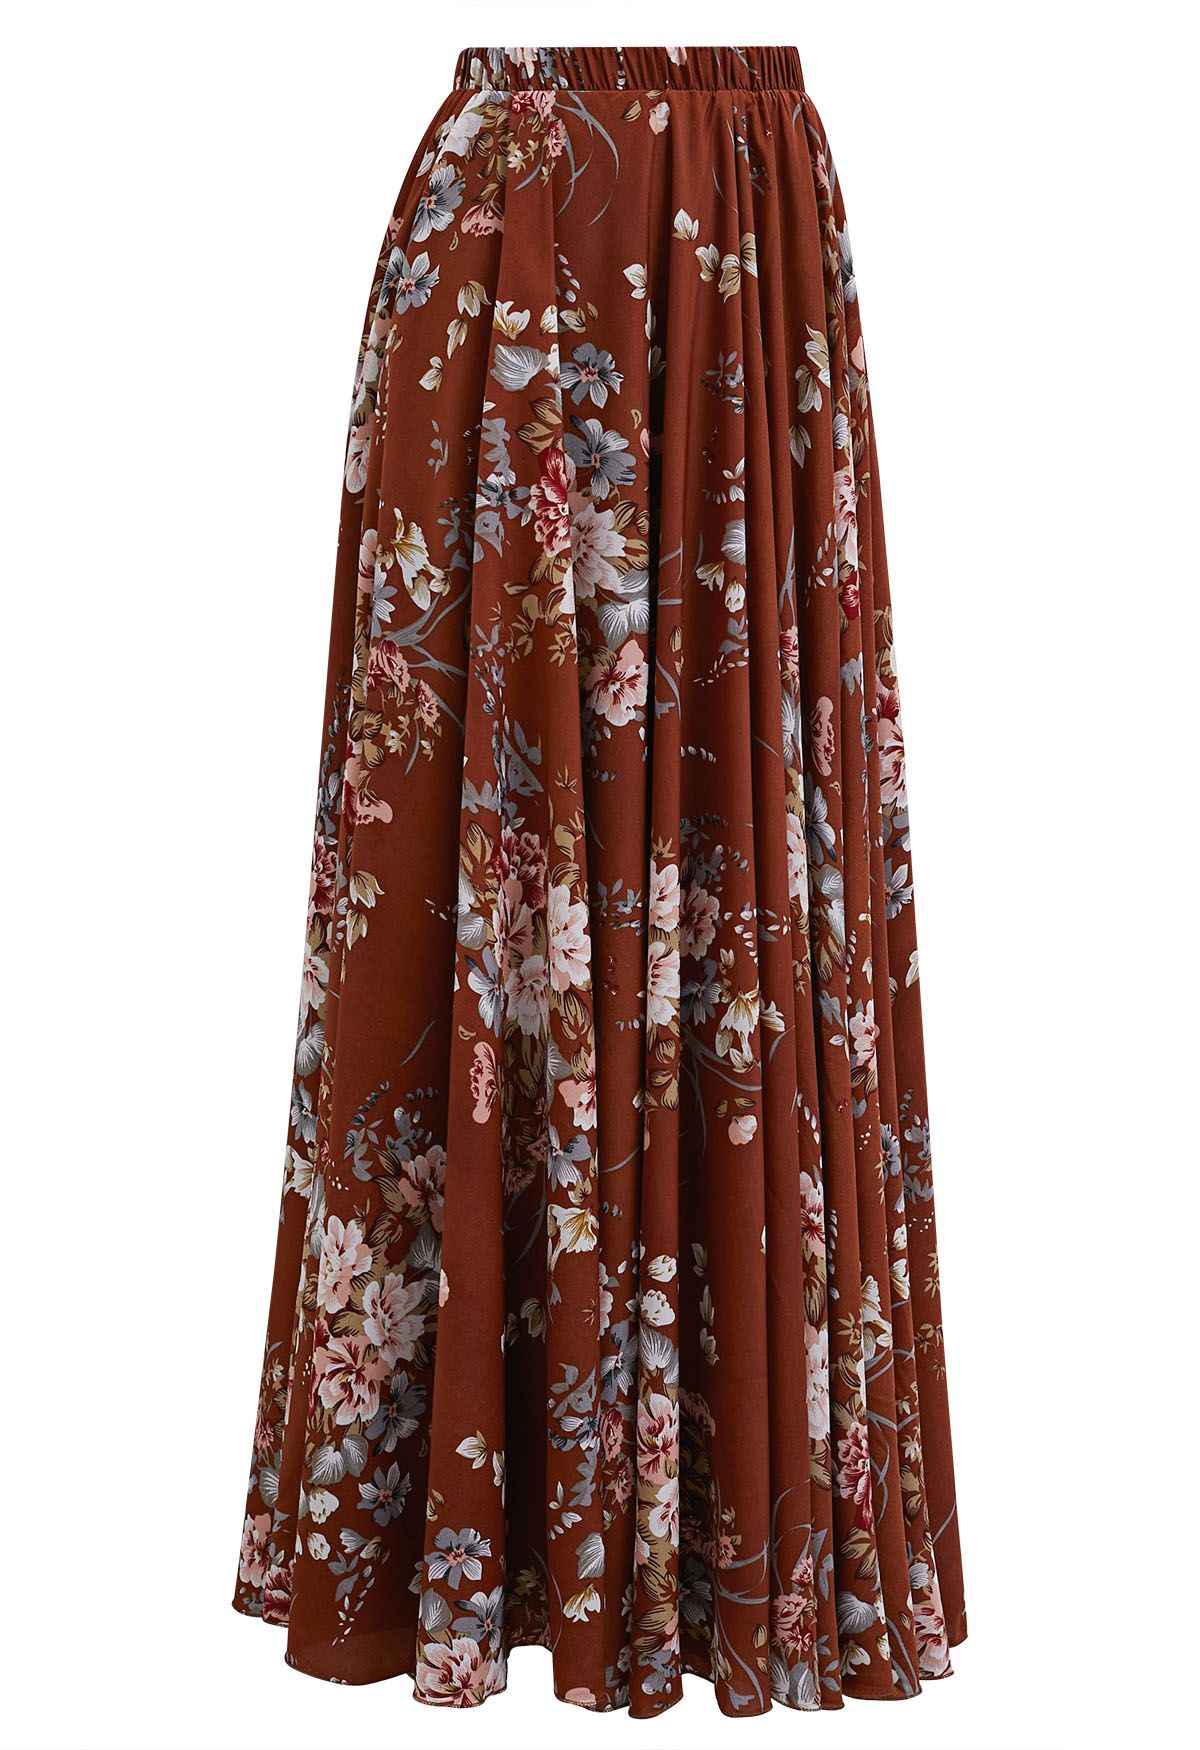 Spellbinding Bouquet Chiffon Maxi Skirt in Rust - Retro, Indie and ...